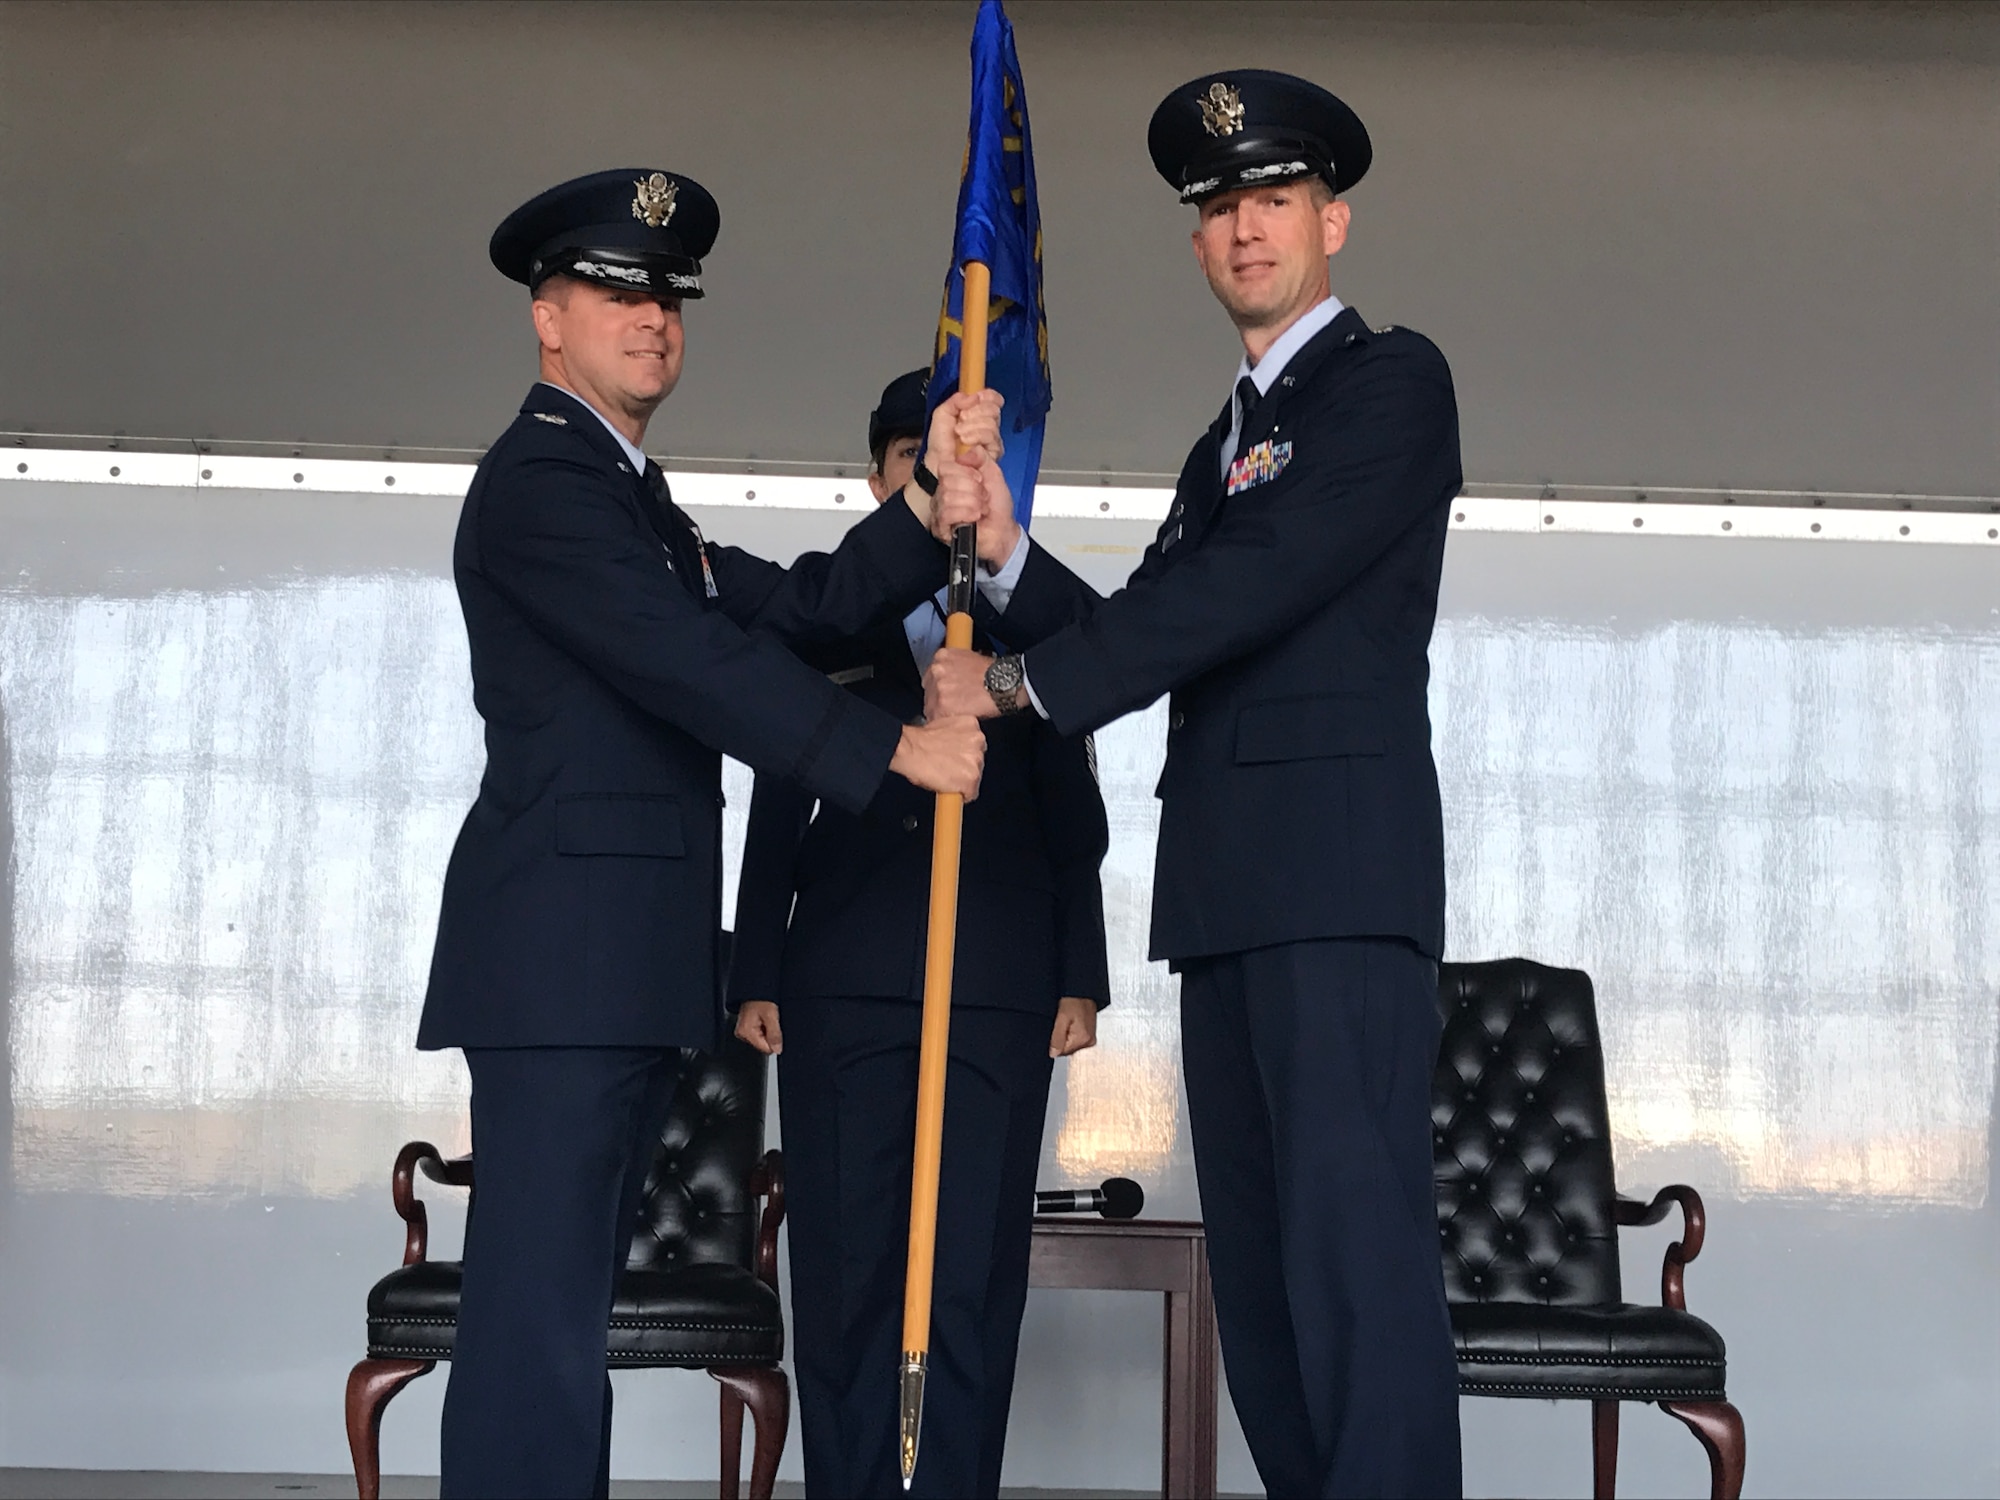 U.S. Air Force Lt. Col. Kristofer “Scot” Terry, incoming 927th Maintenance Group commander, accepts the guidon from Col. Frank Amodeo, 927th Air Refueling Wing commander, during the assumption of command ceremony Dec. 3, 2016, at MacDill Air Force Base, FL. Terry assumed command of the 927th Maintenance Group after serving at Air Force Reserve Headquarters as chief of the Aircraft Maintenance Management Branch. (U.S. Air Force photo by Senior Airman Xavier Lockley)